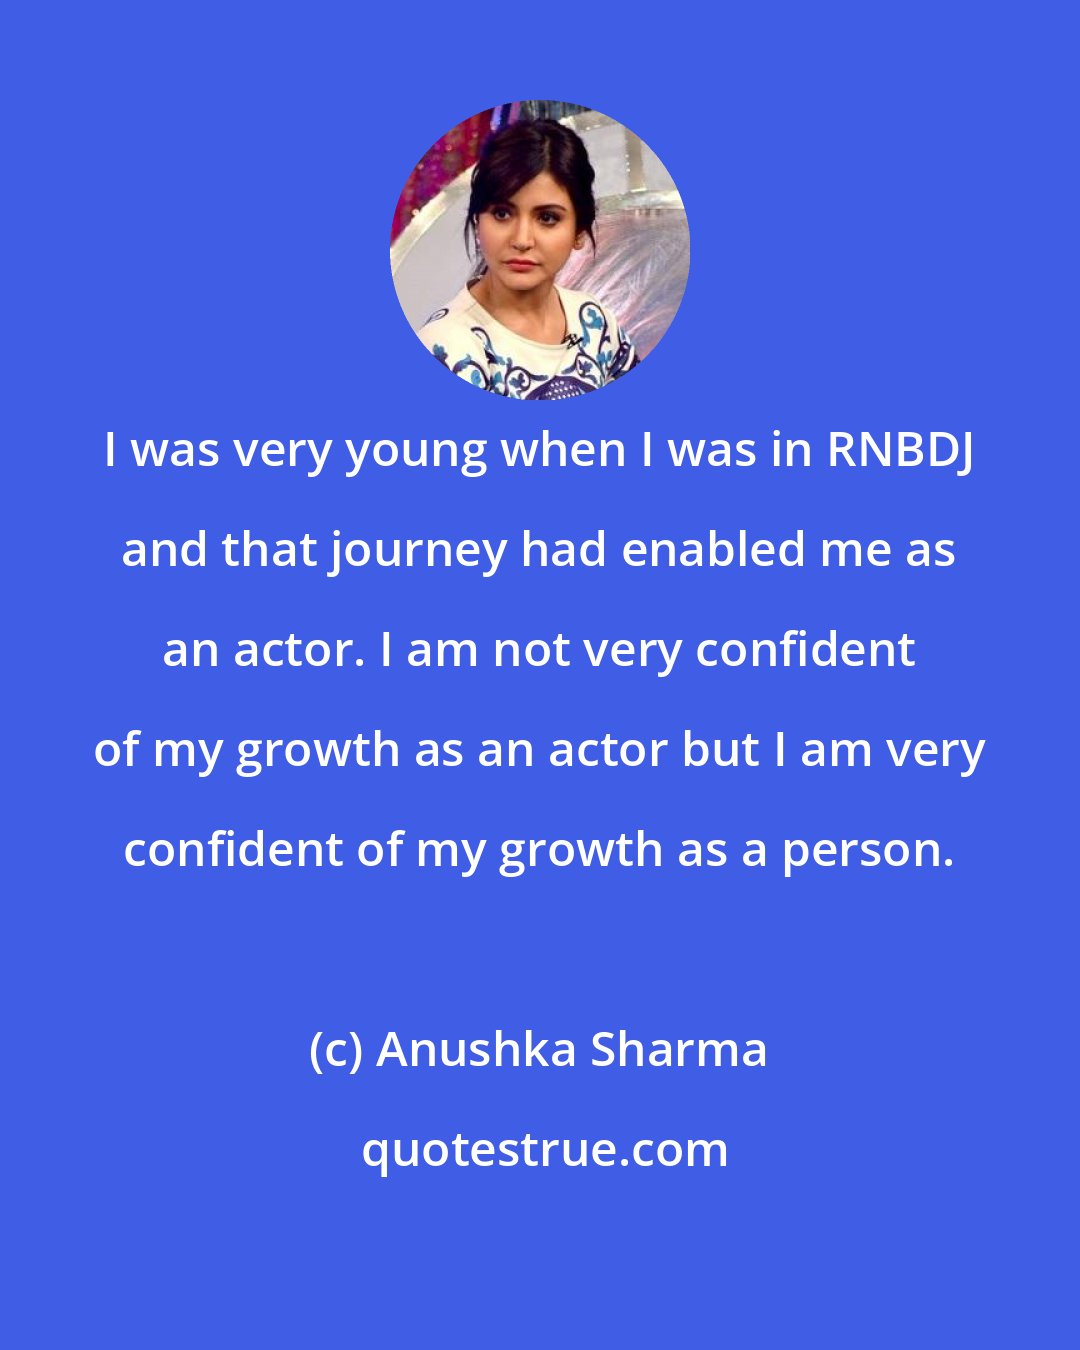 Anushka Sharma: I was very young when I was in RNBDJ and that journey had enabled me as an actor. I am not very confident of my growth as an actor but I am very confident of my growth as a person.